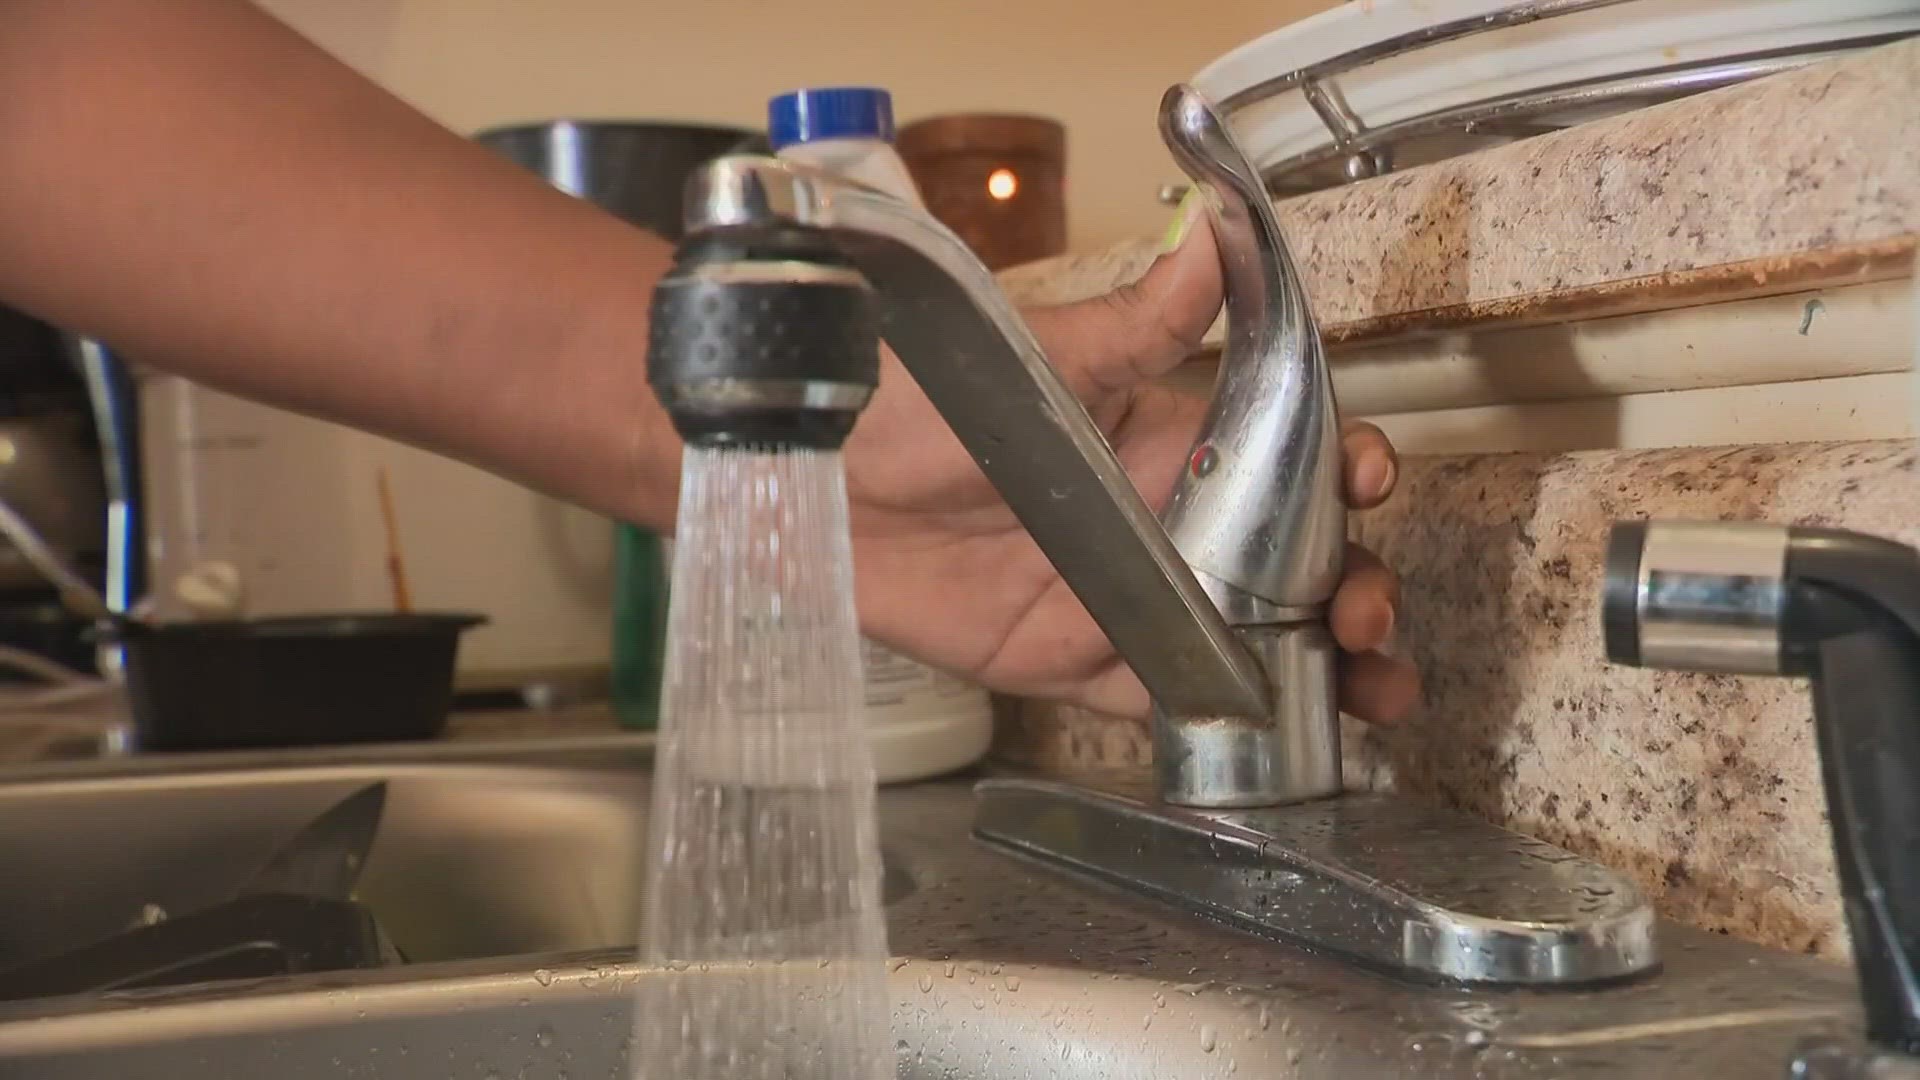 The City has proposed to raise rate hikes for water by up to 46% over the next two years.